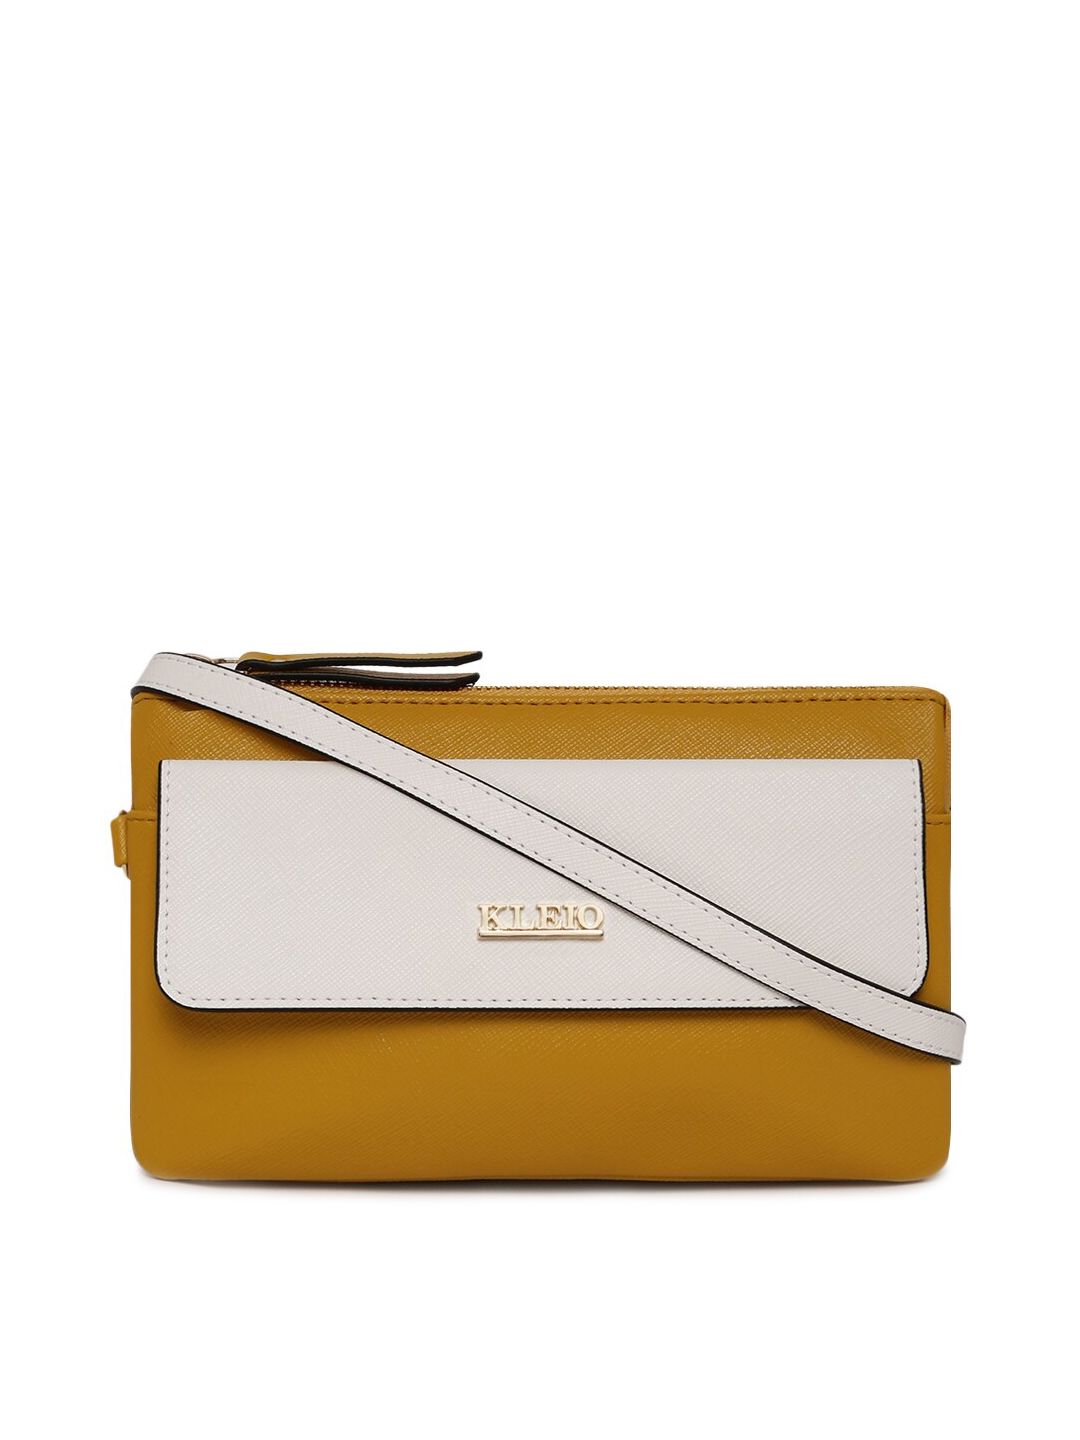 KLEIO Mustard Yellow Colourblocked PU Structured Sling Bag Price in India